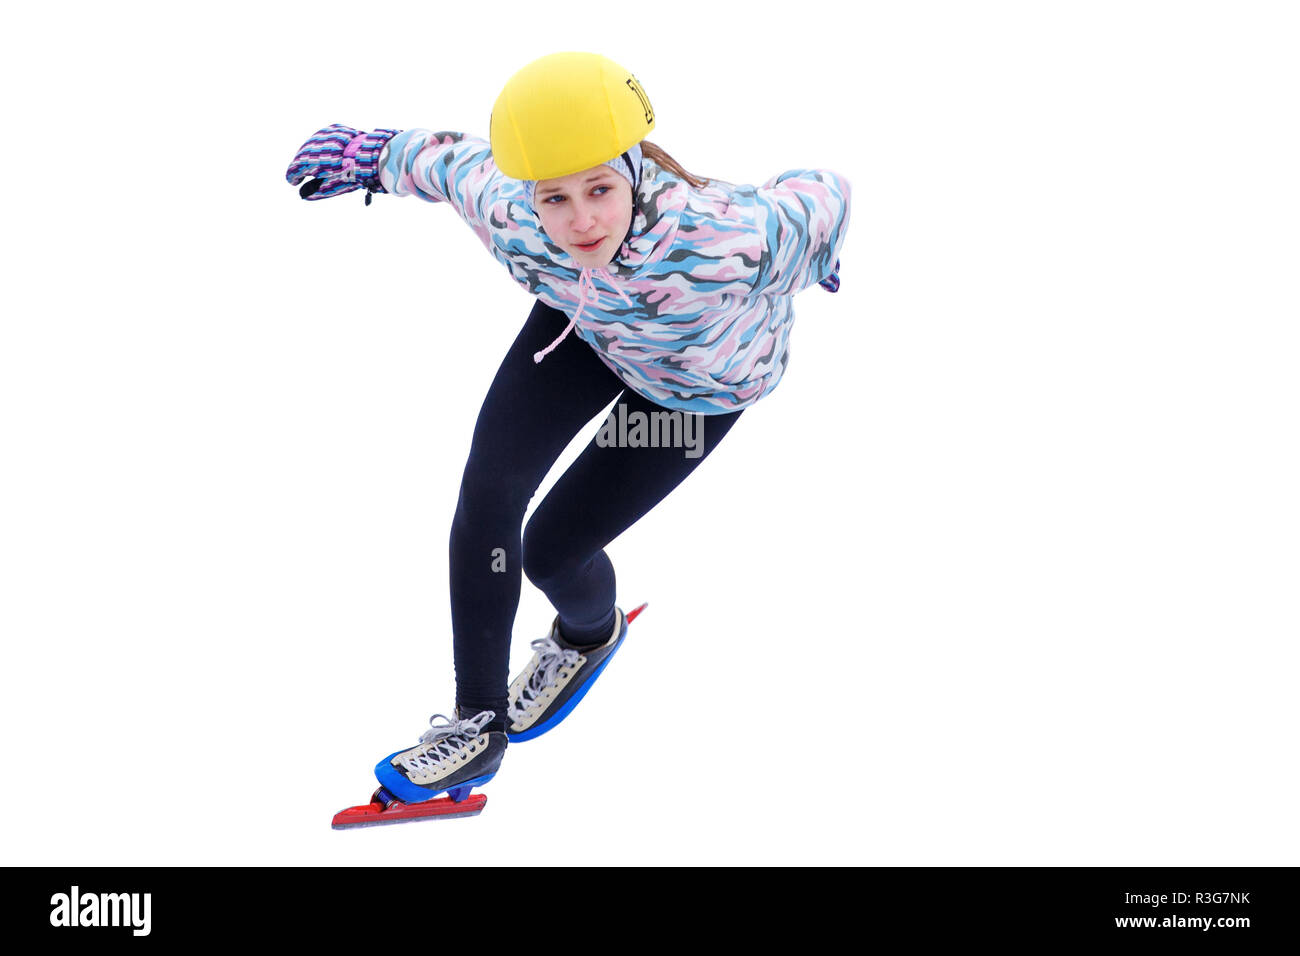 Short track isolated sportswoman. Speed skating young girl on training rink. Stock Photo